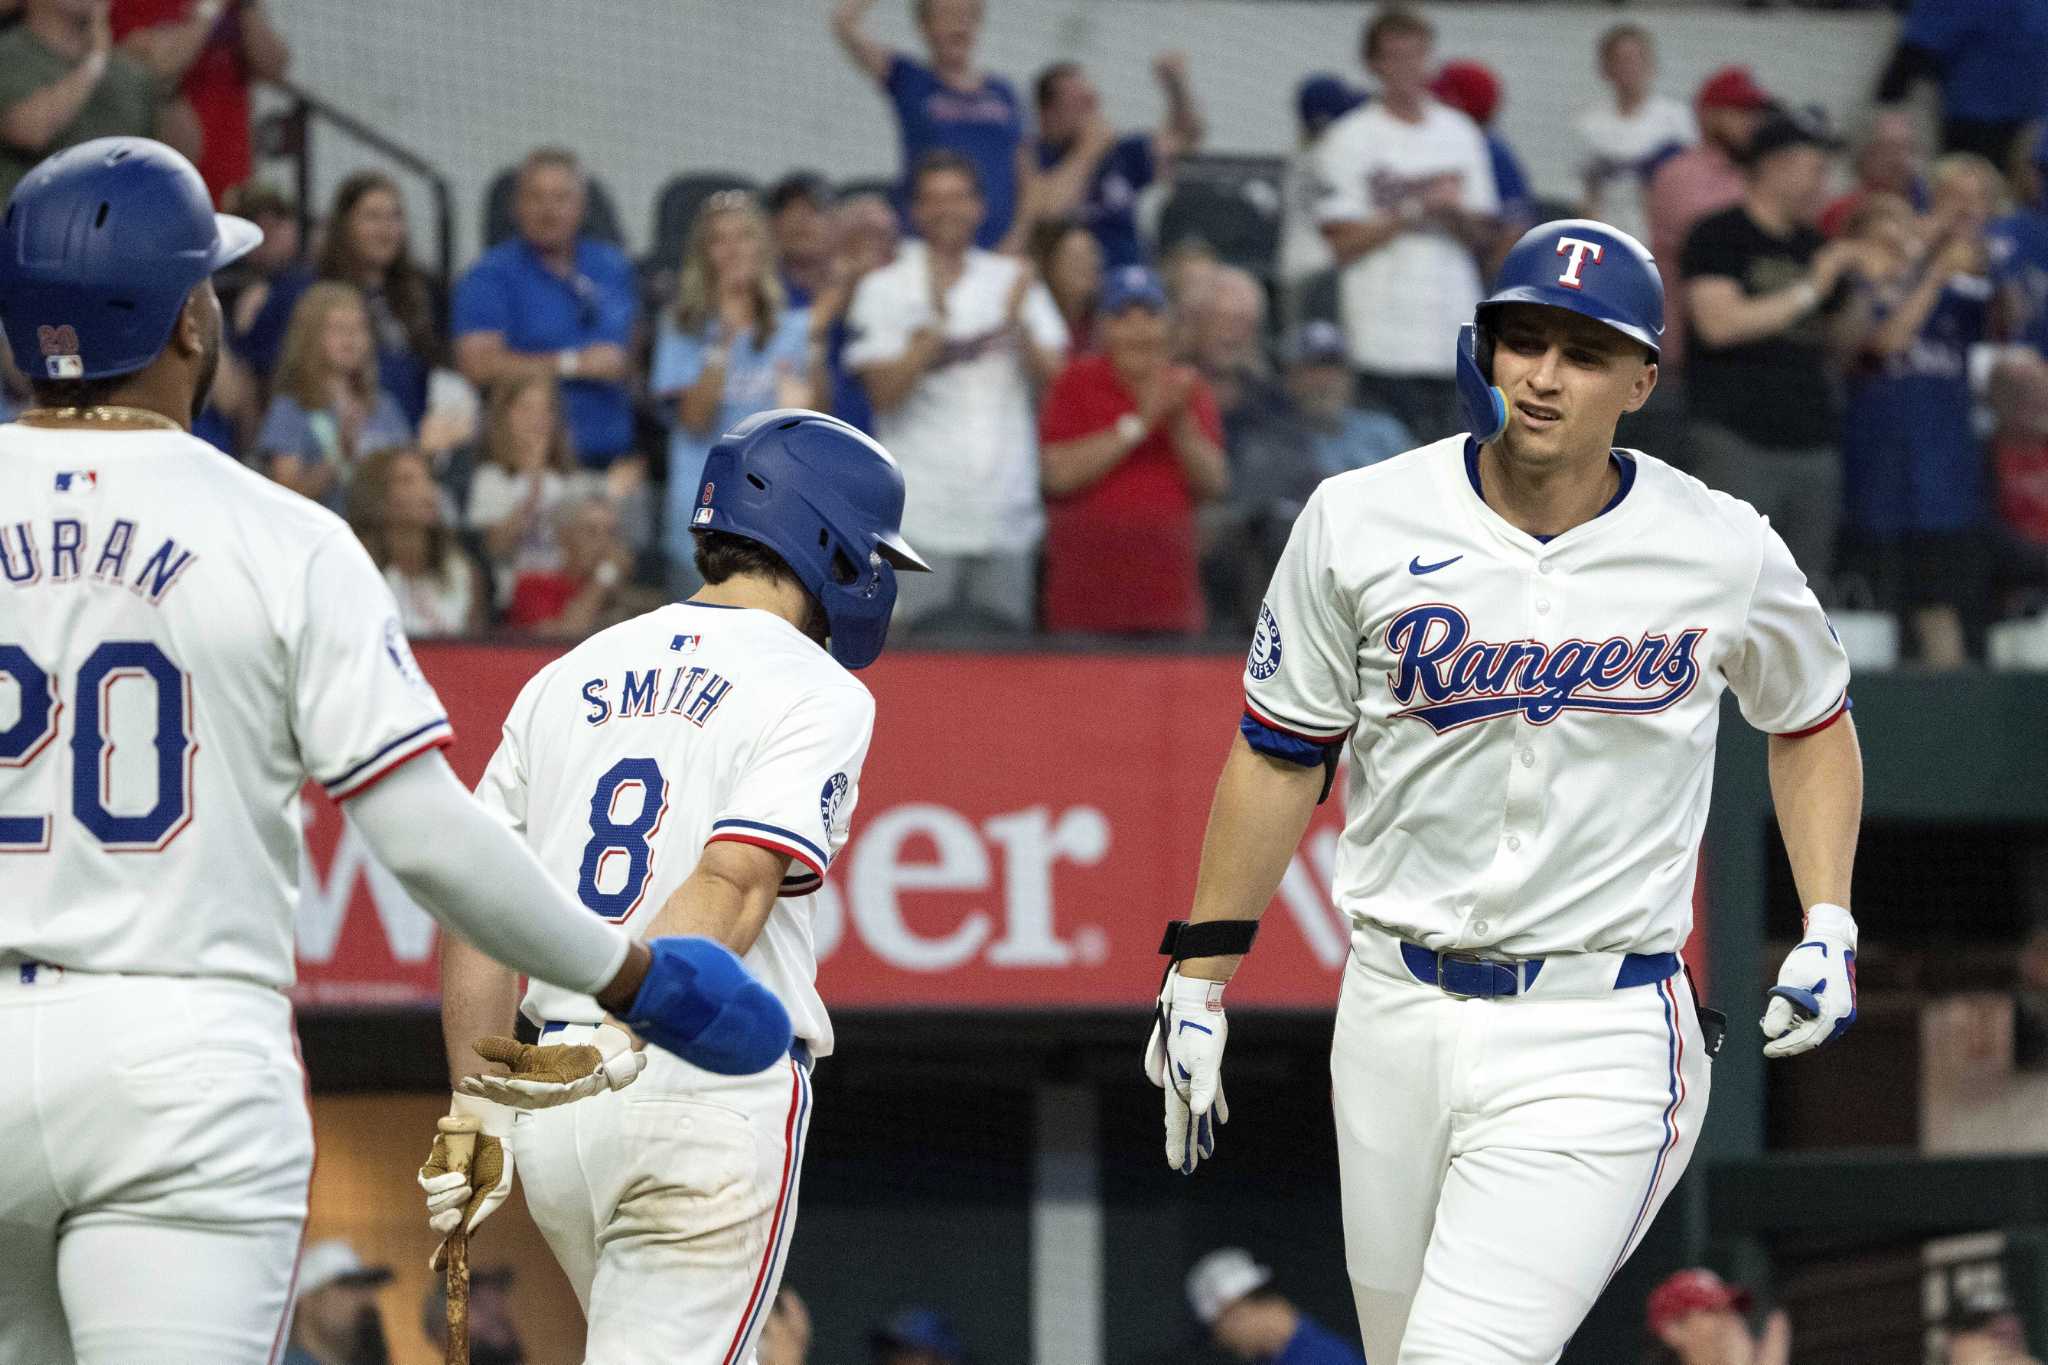 Seager hits 8th homer in 8 games, Rangers sweep World Series rematch with 6-1 win over Diamondbacks